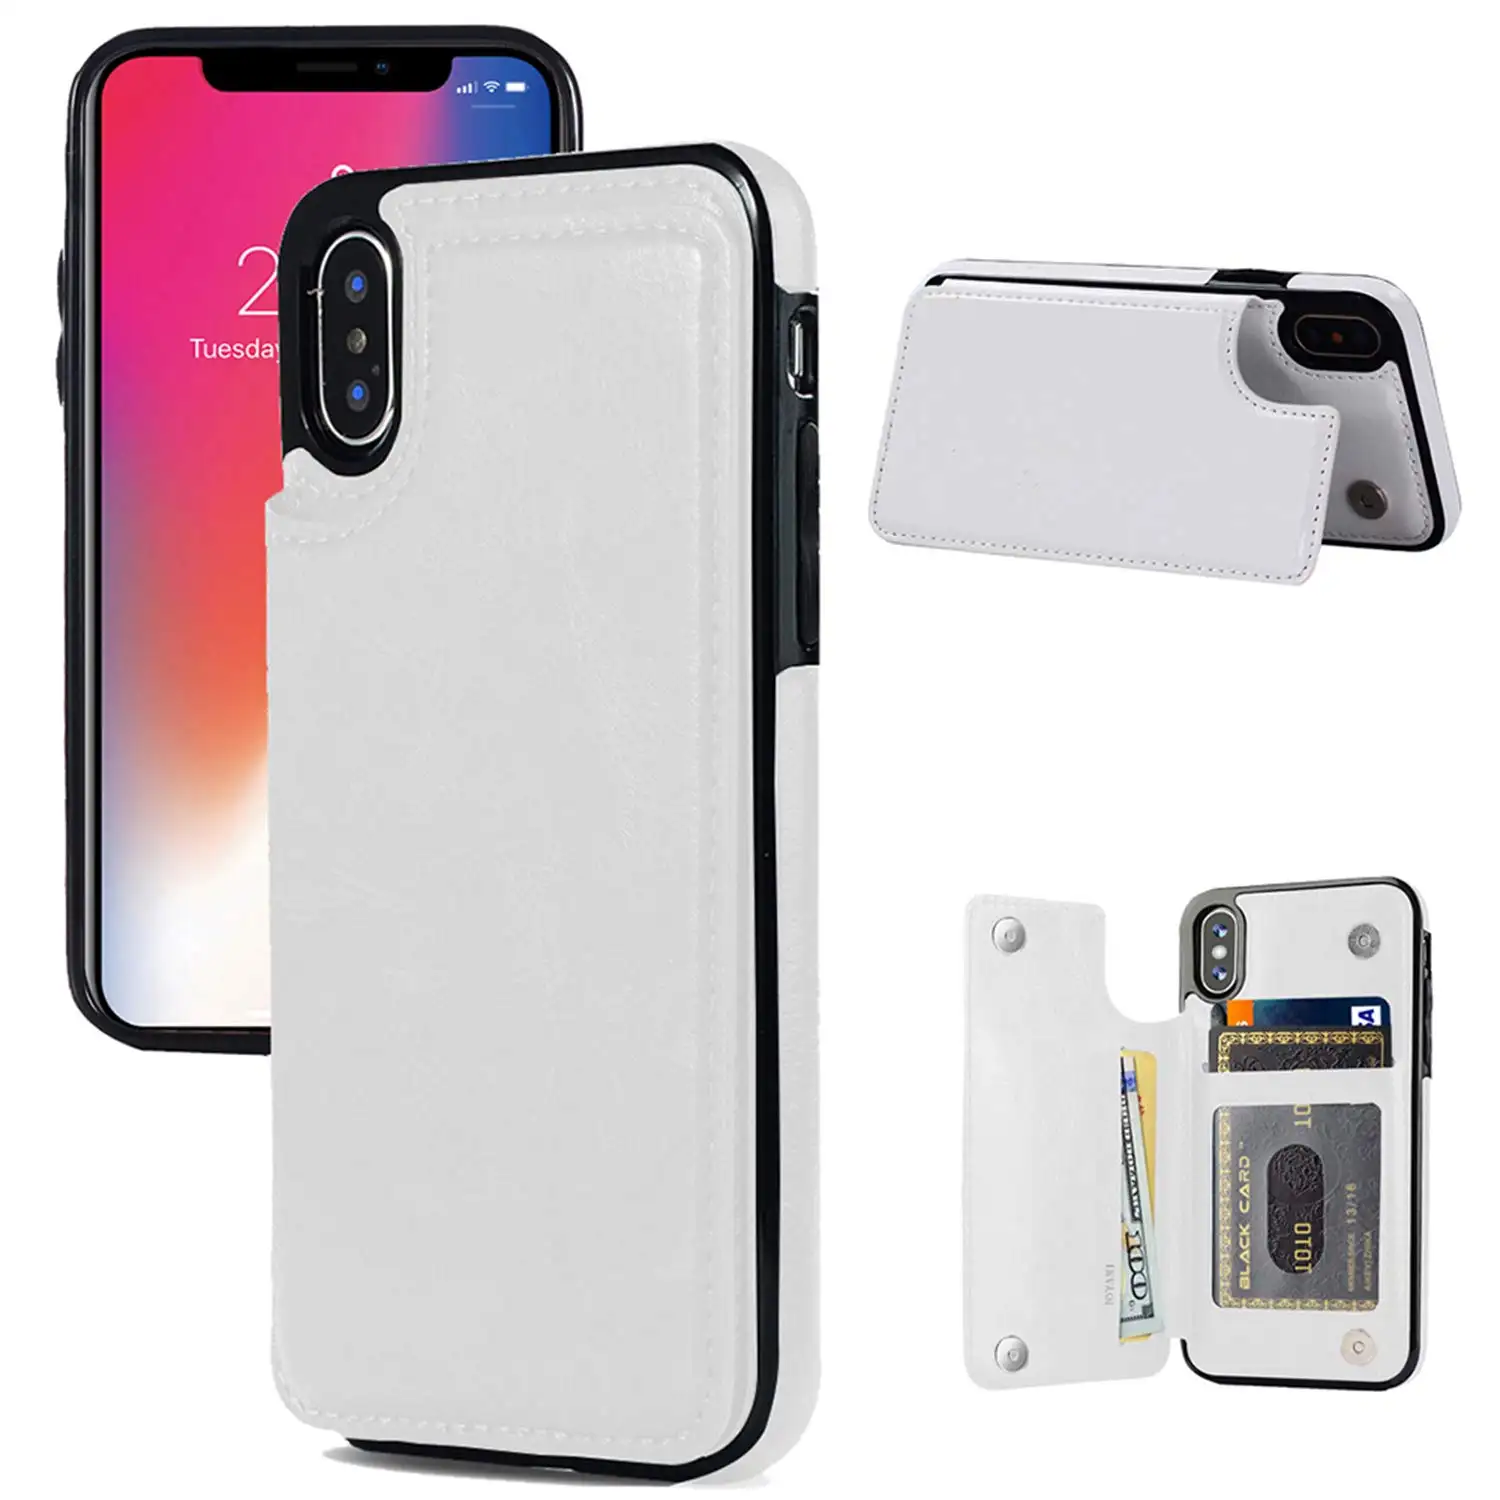 iPhone X/XS Slim Leather Case with Credit Card Holder Protective Case with a Free Screen Protector for